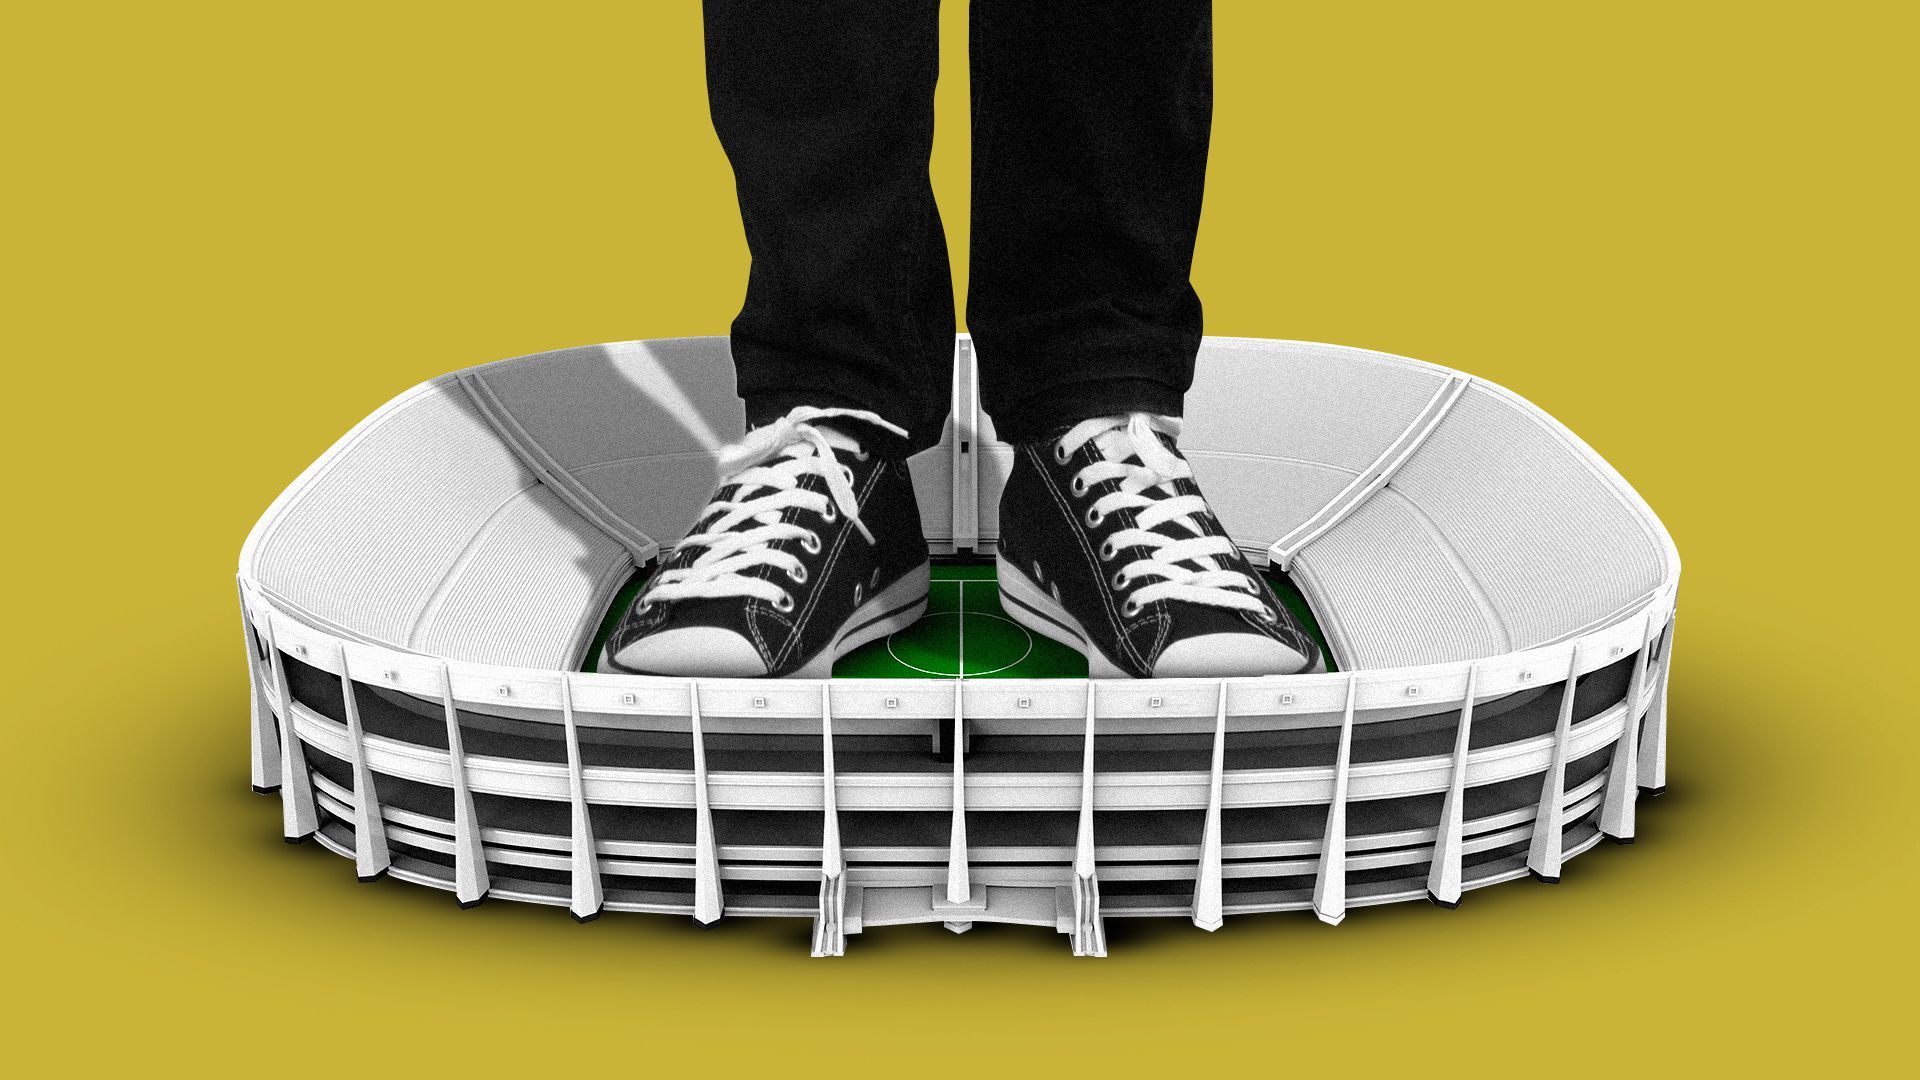 Illustration of a giant pair of legs standing in a tiny stadium. 